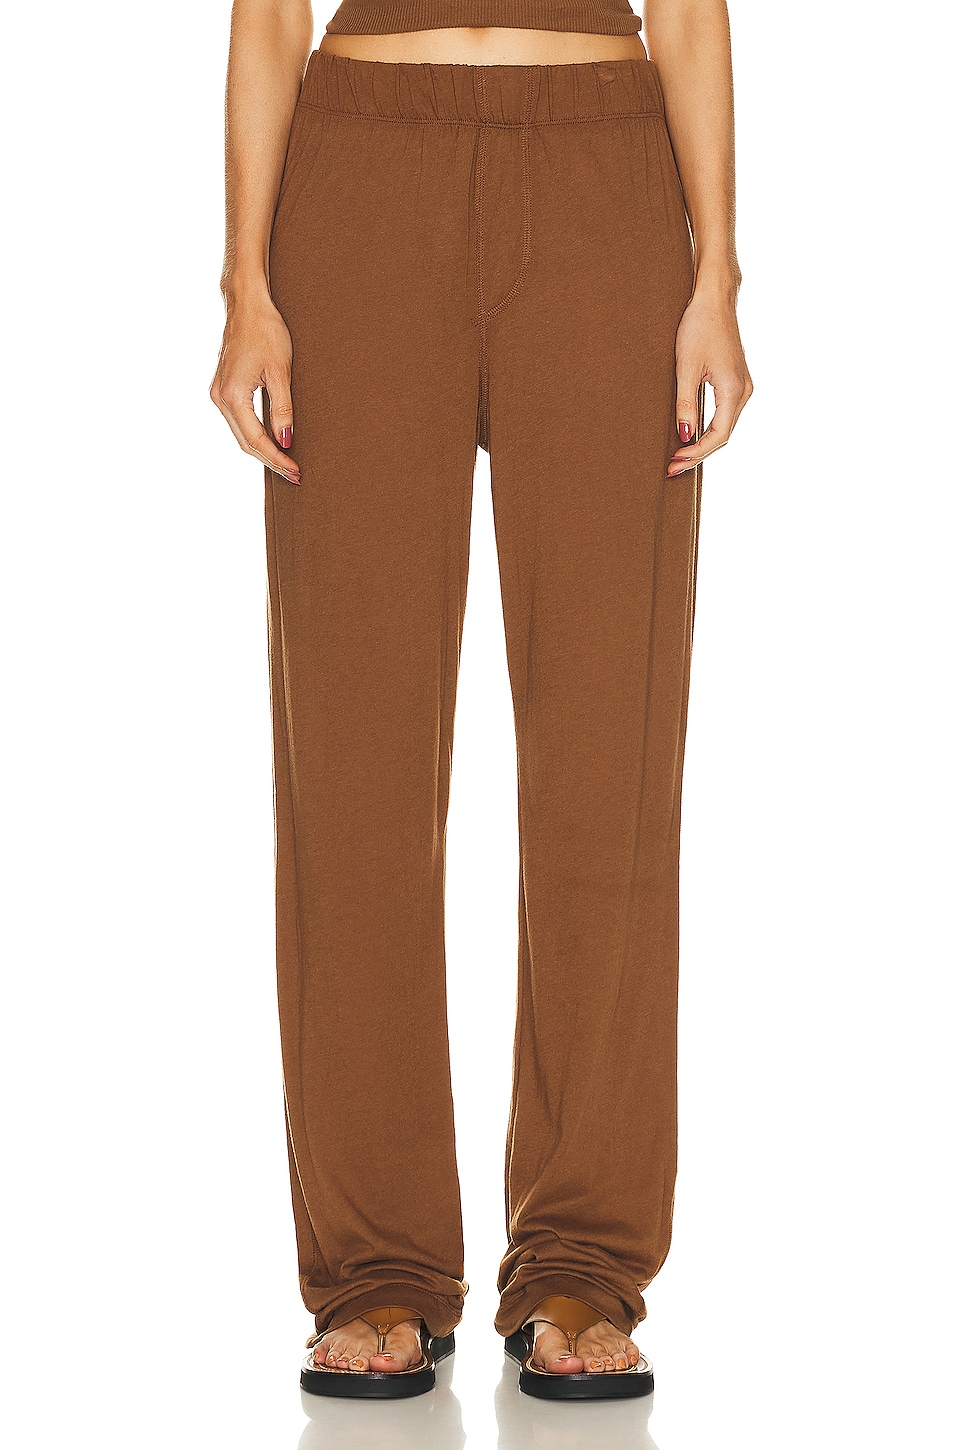 Image 1 of Eterne Lounge Pant in Earth